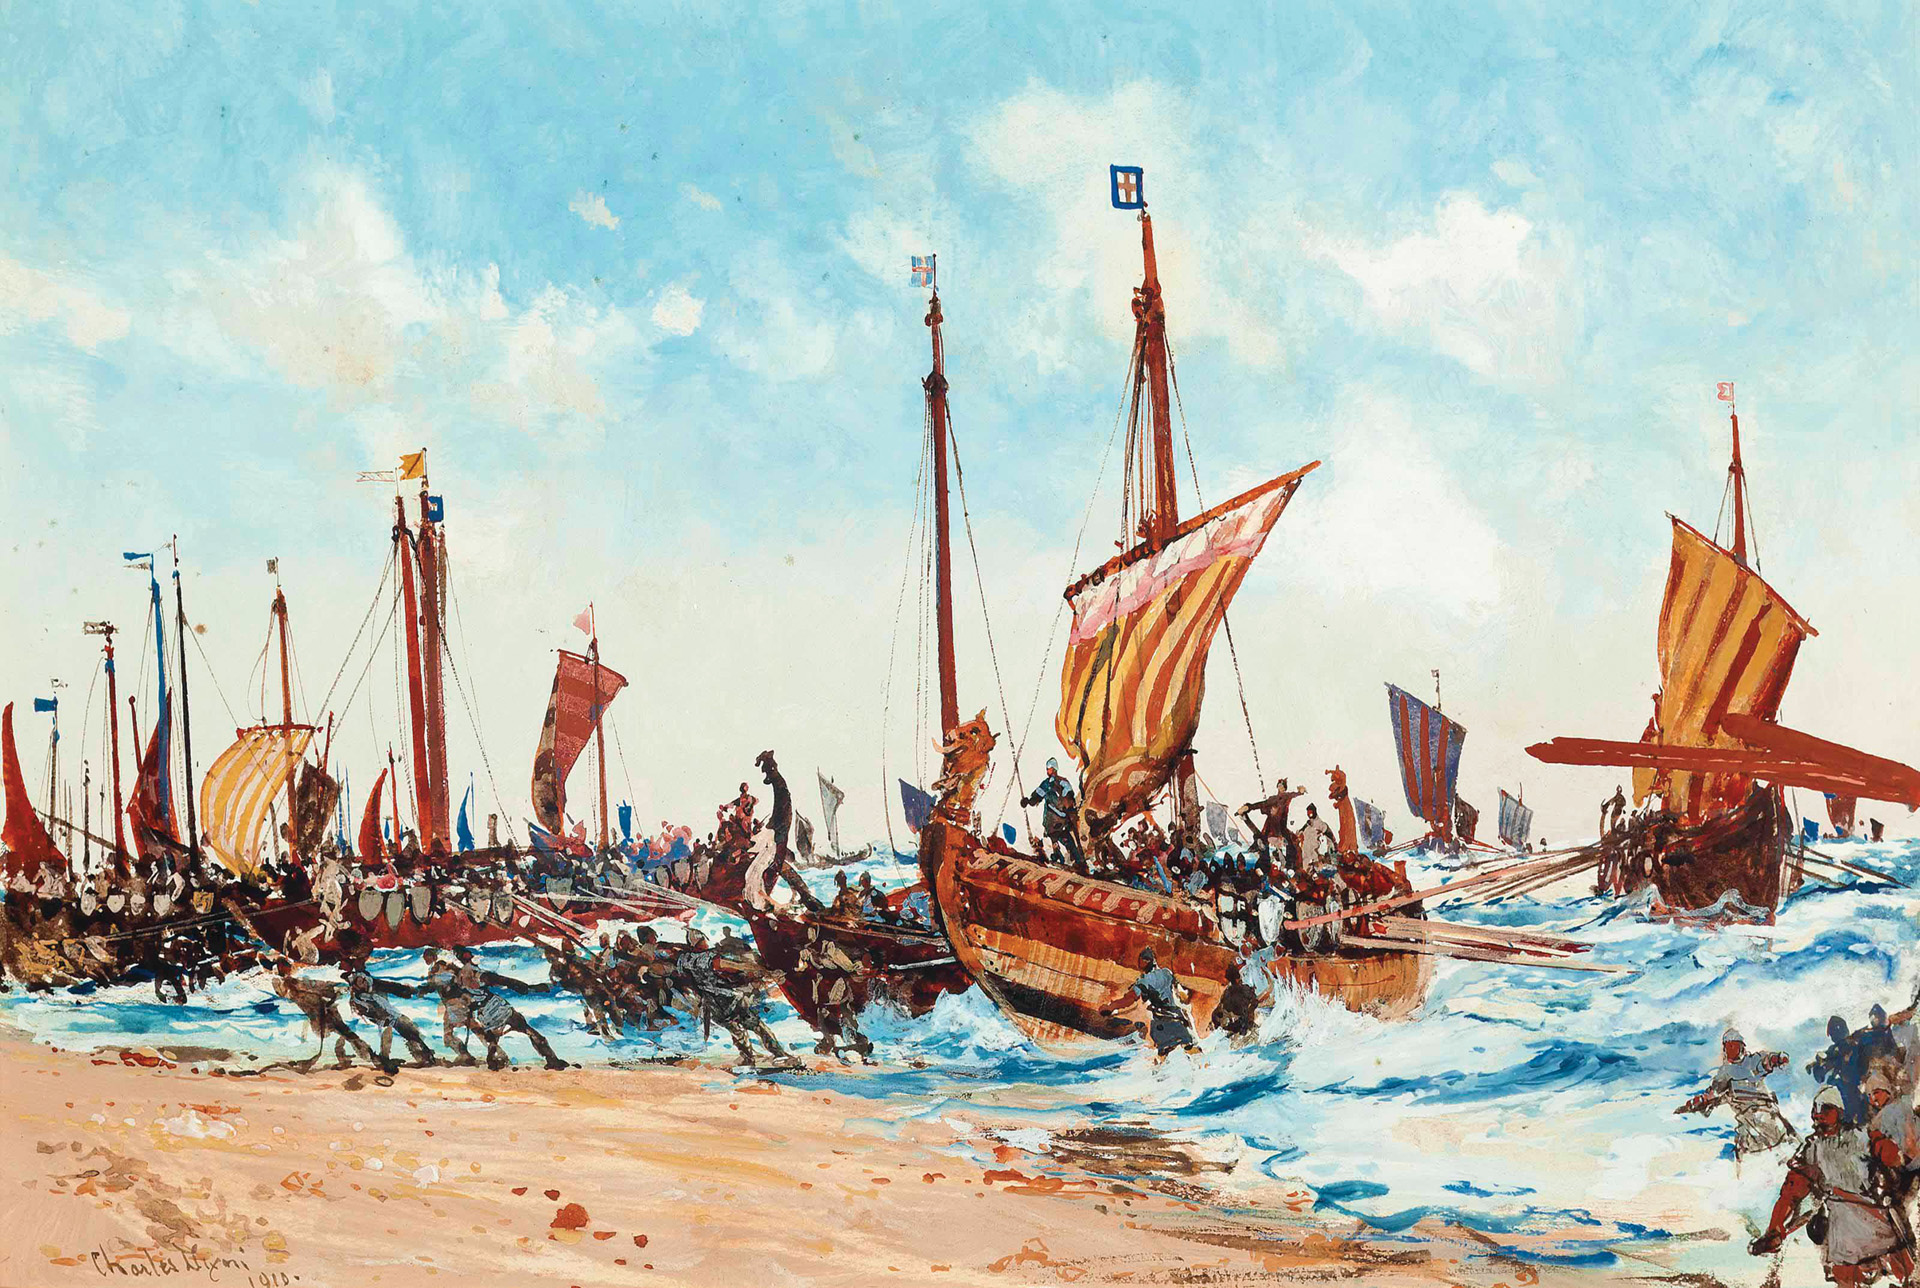 Duke William of Normandy's armada hove to at Pevensey, where his quick-footed, unarmored archers reconnoitered the area, followed by the heavy infantry and horsemen. The Normans went to work immediately to build a fortification with which to defend the landing site.